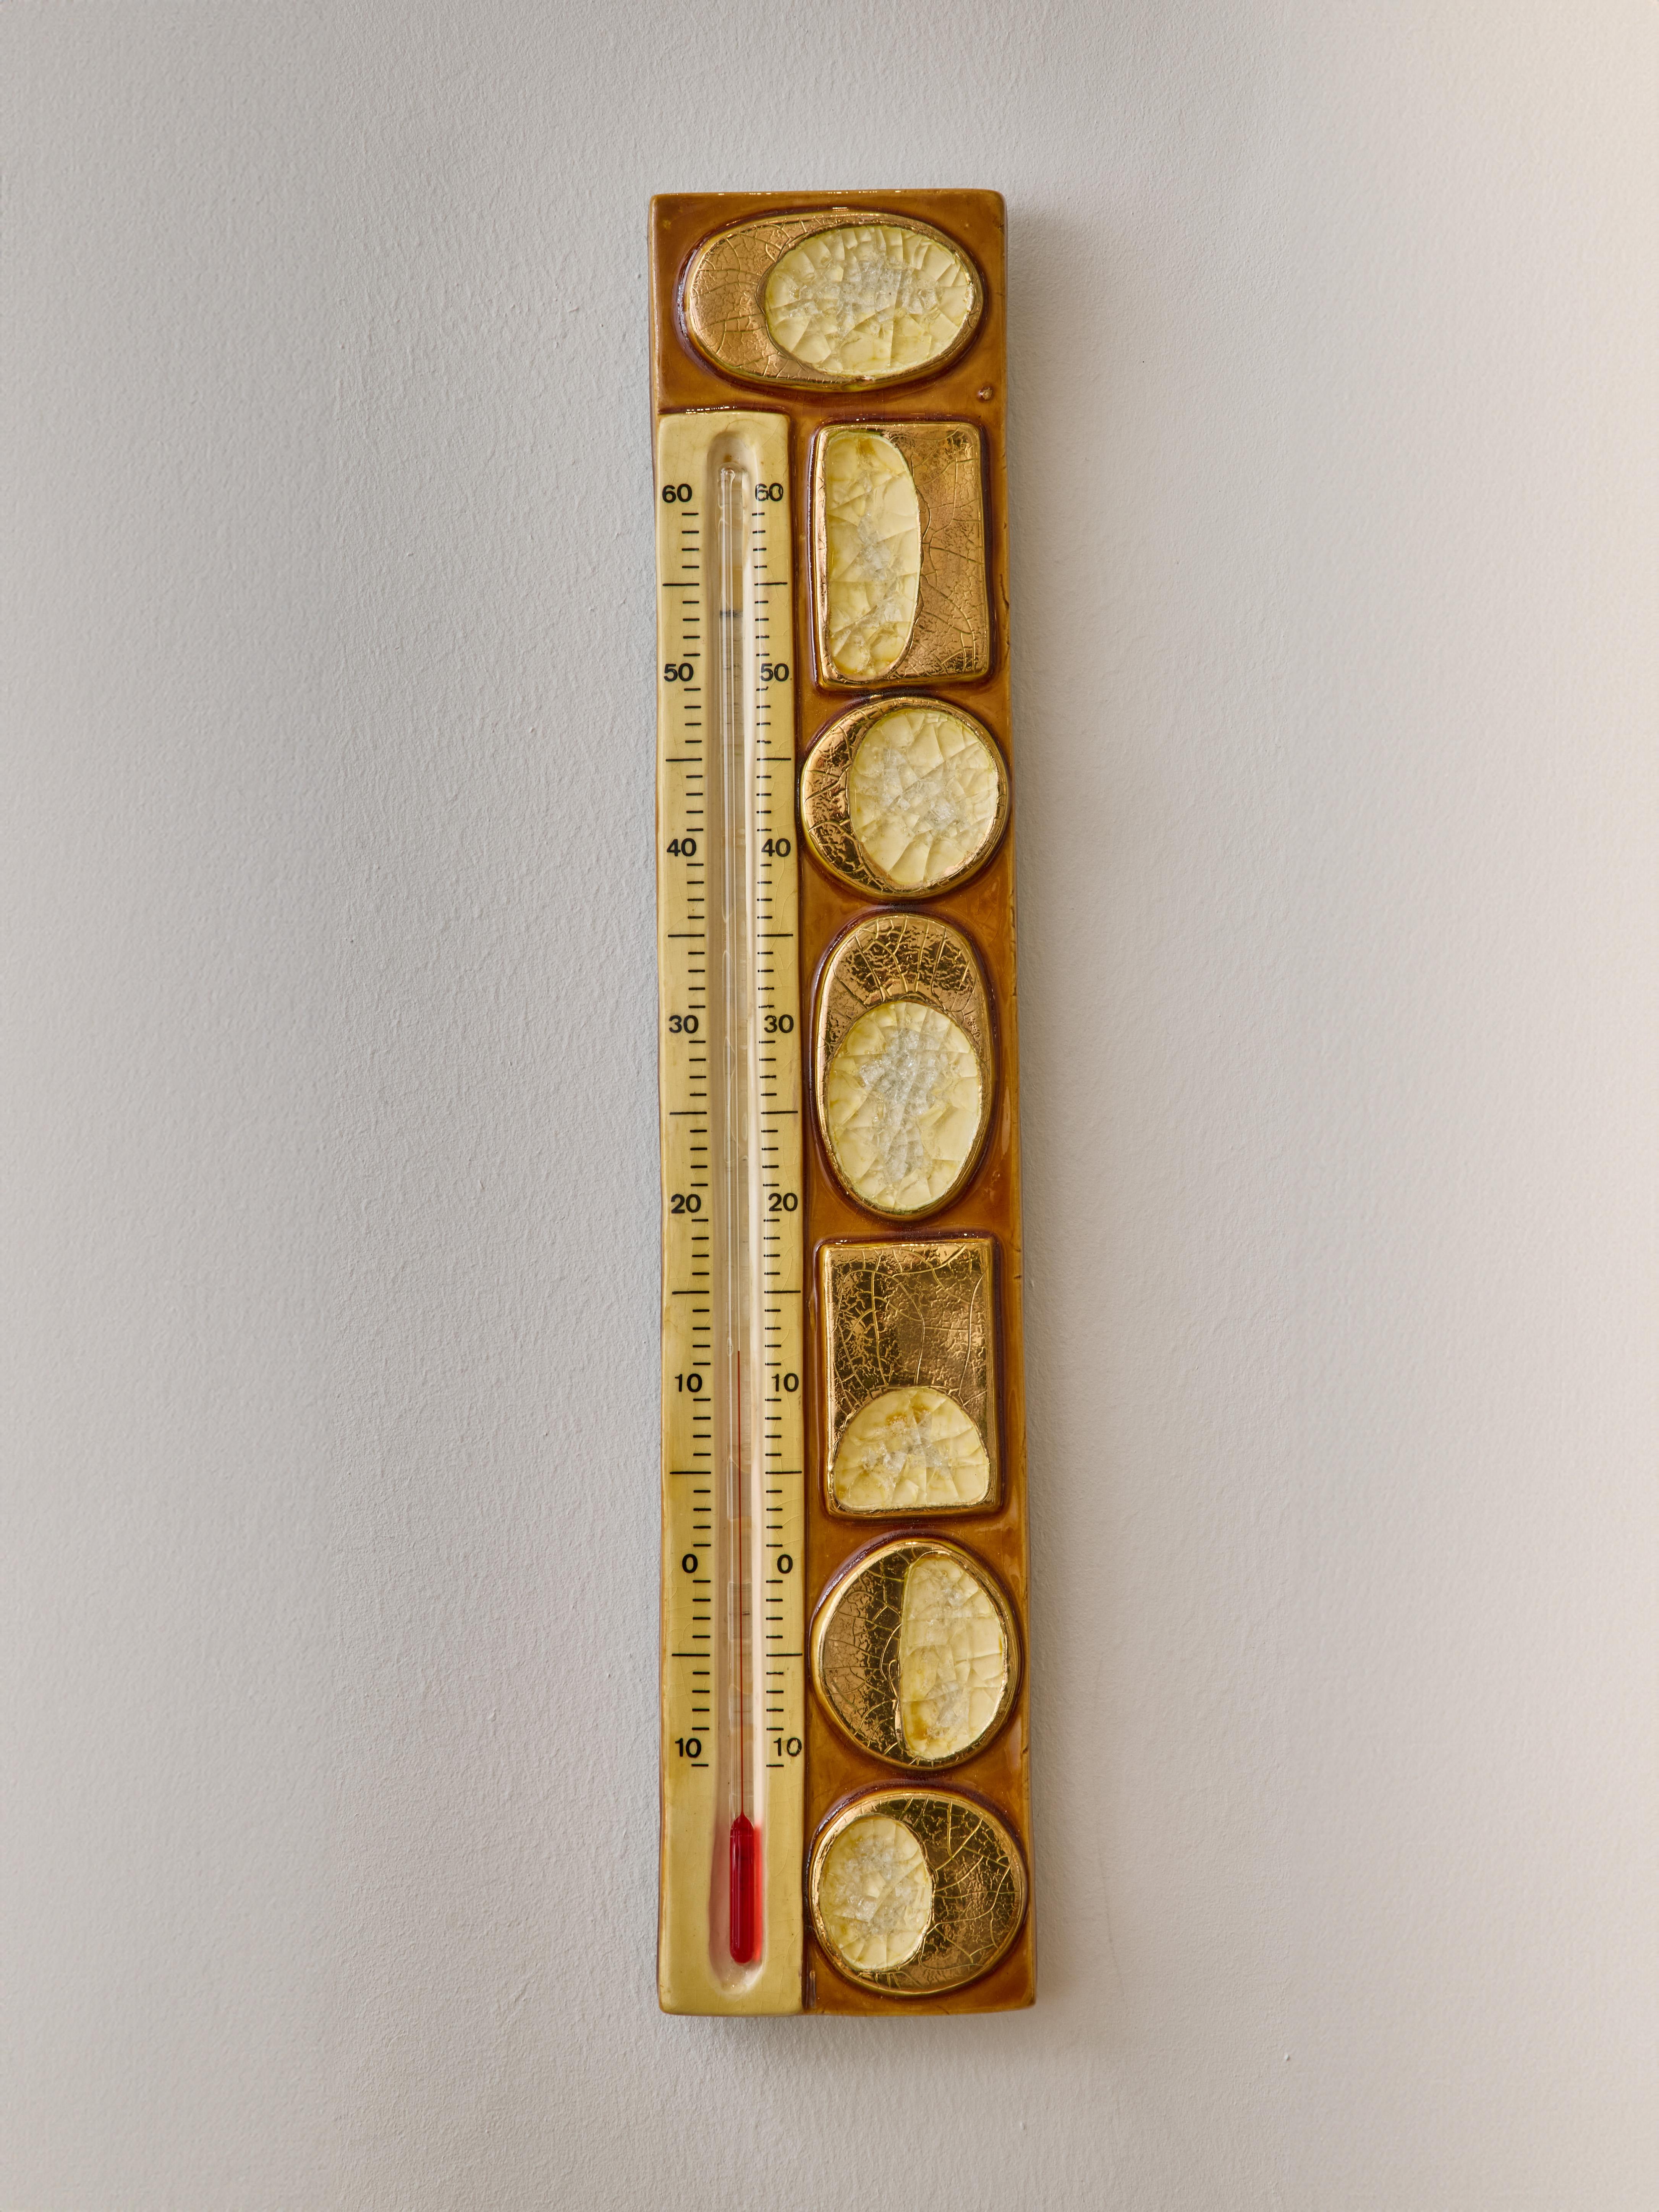 Beautiful wall thermometer in ceramic by Mithé Espelt. Abstract decors with gold glaze and pockets of molten glass

 

Marie Thérèse Espelt, aka. Mithé Espelt (1923-2020)

 

Born in the town of Lunel, near Montpelier; Mithé Espelt began her career